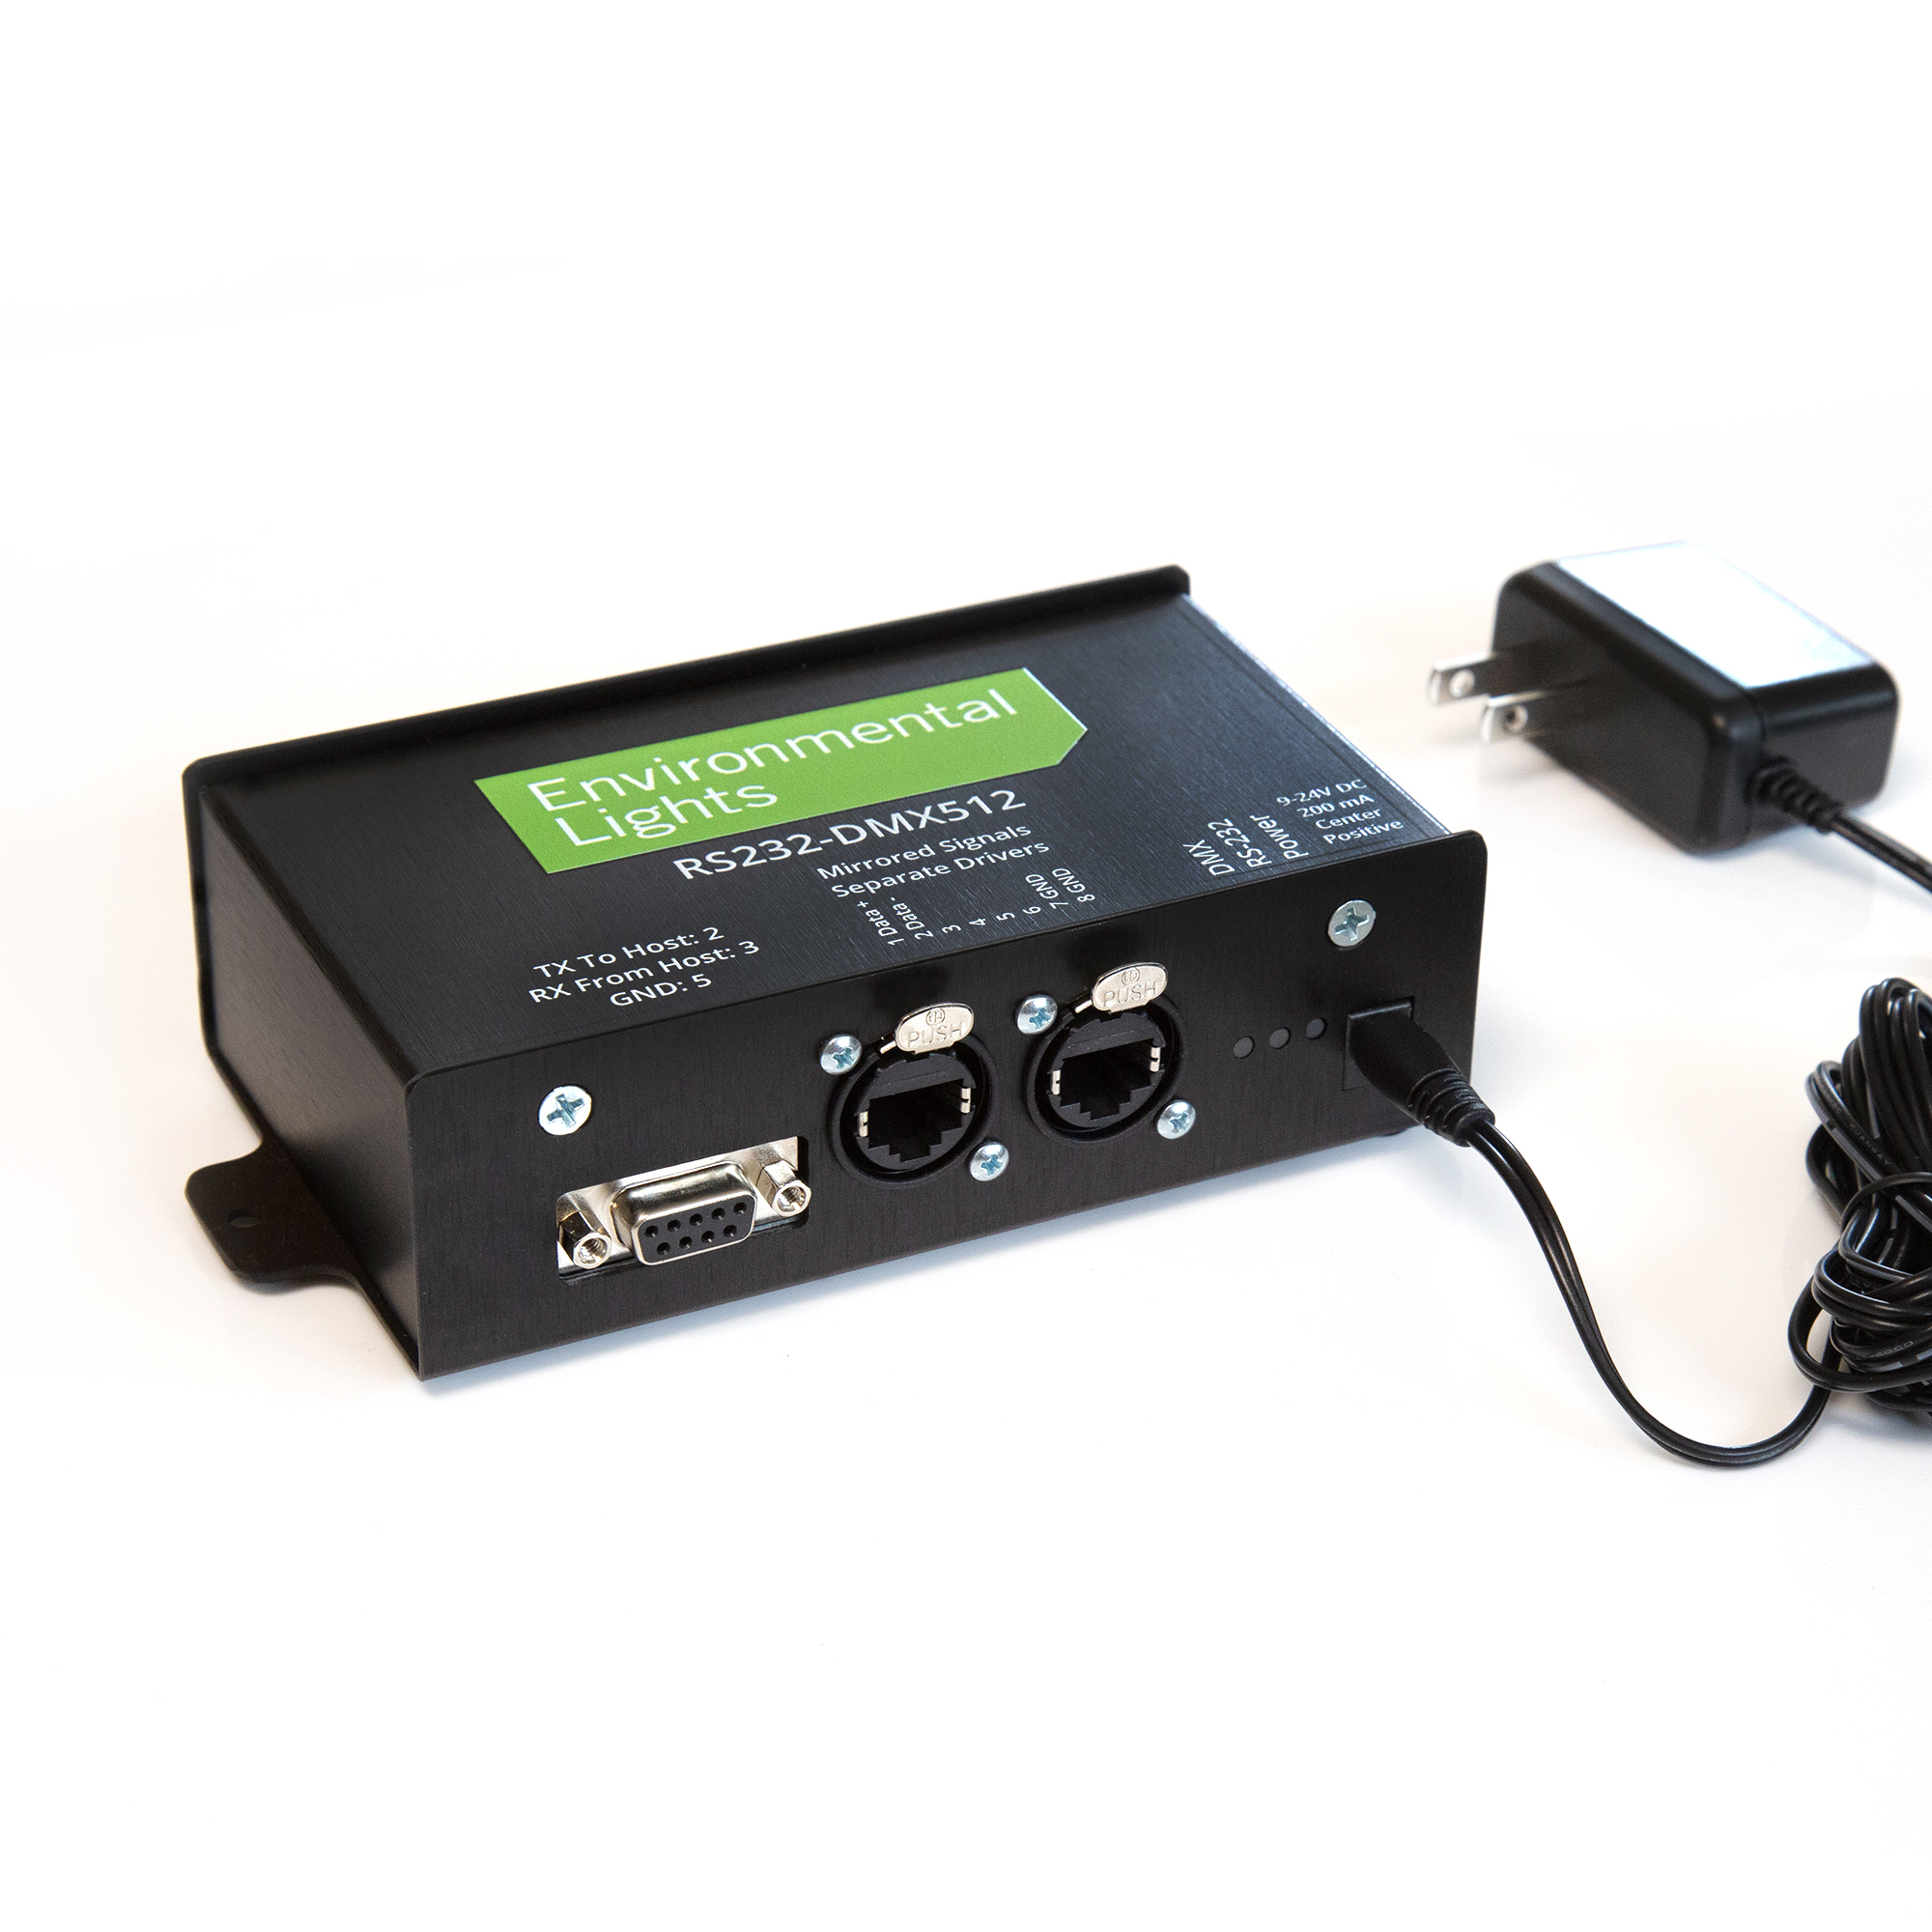 Environmental Lights Launches New RS232 to DMX Converter